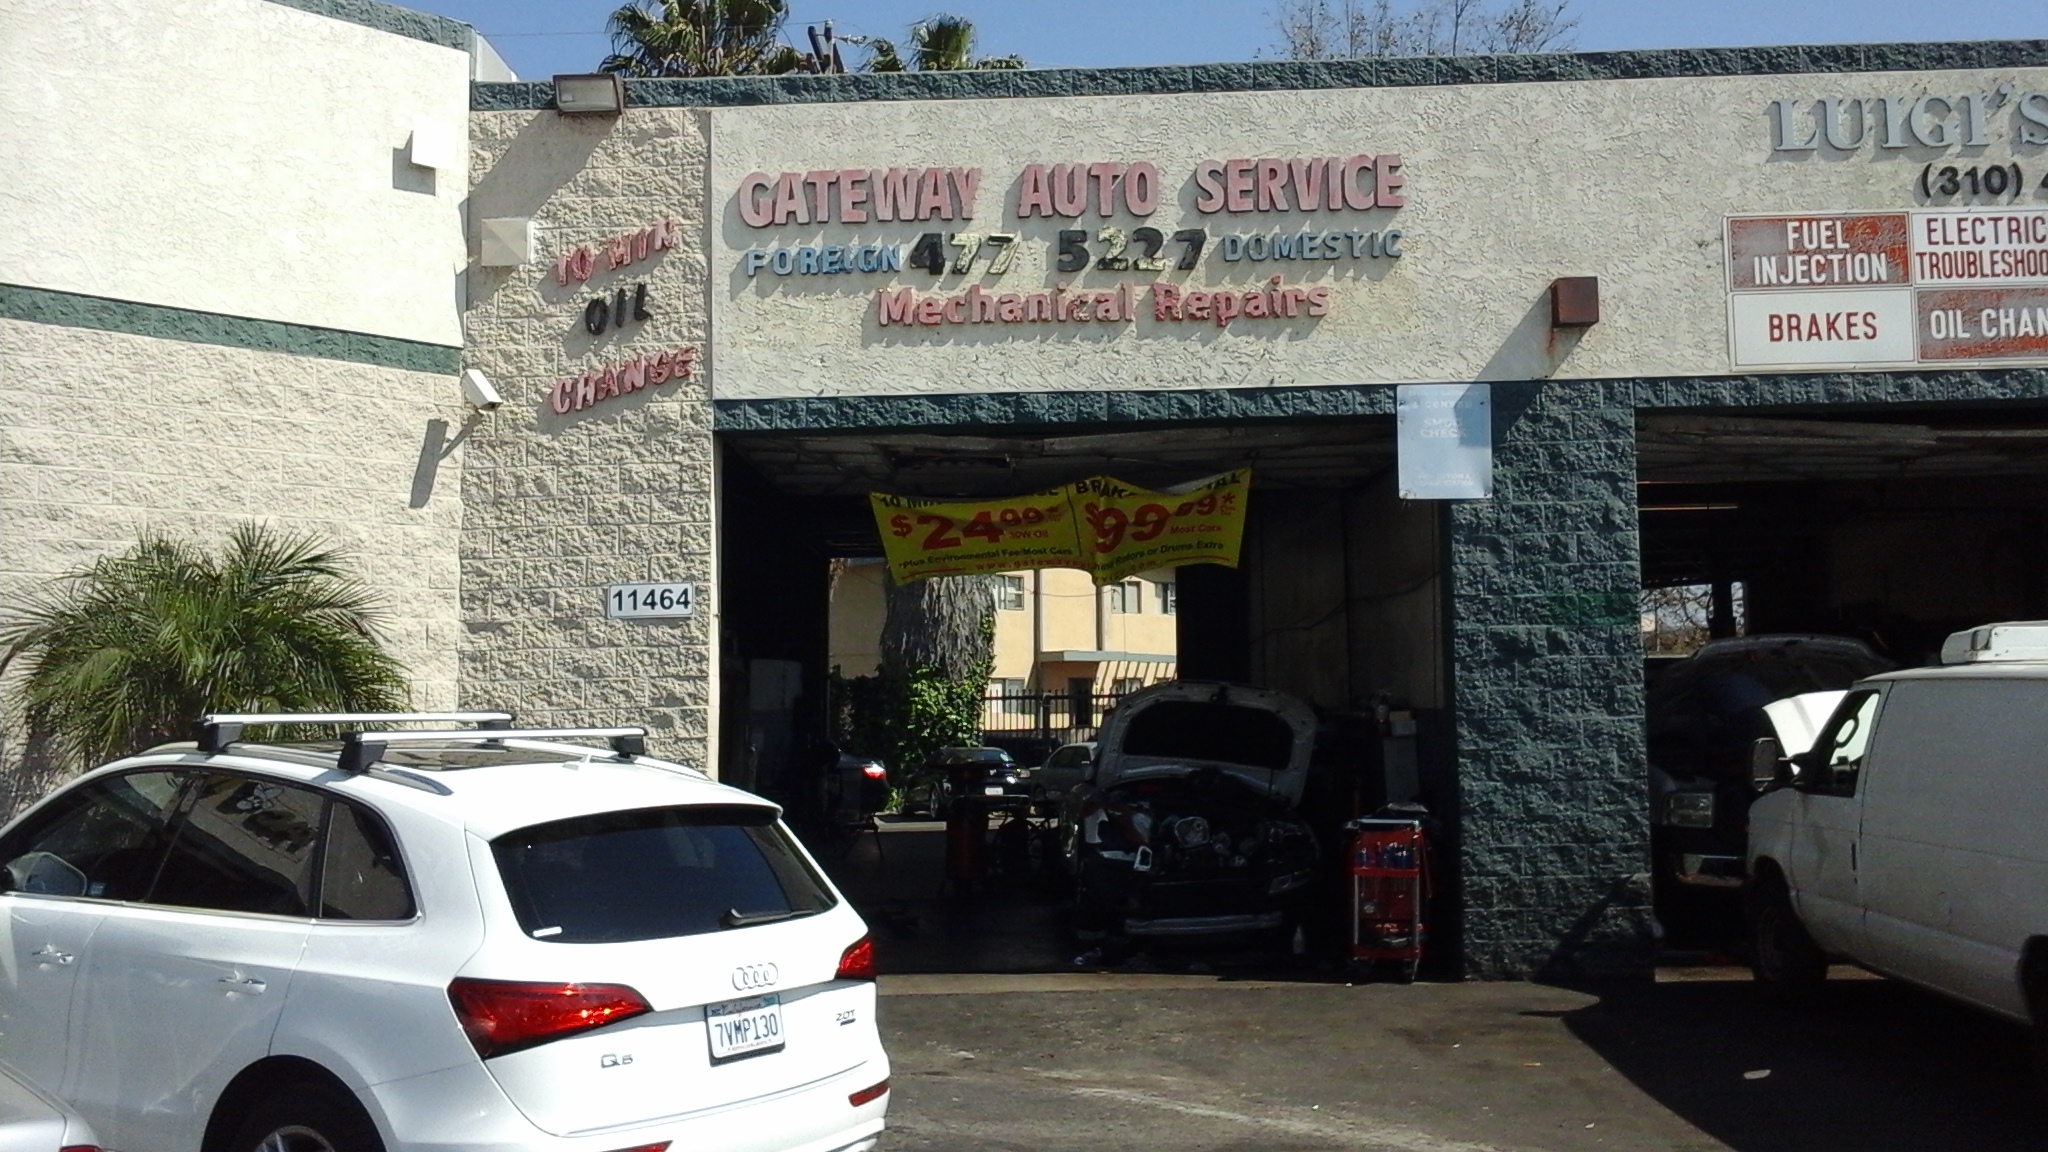 We provides service and repair to all makes and models of foreign and American cars and trucks including but not limited to oil changes, brake repair, engine repair, transmission repair and fleet repairs.